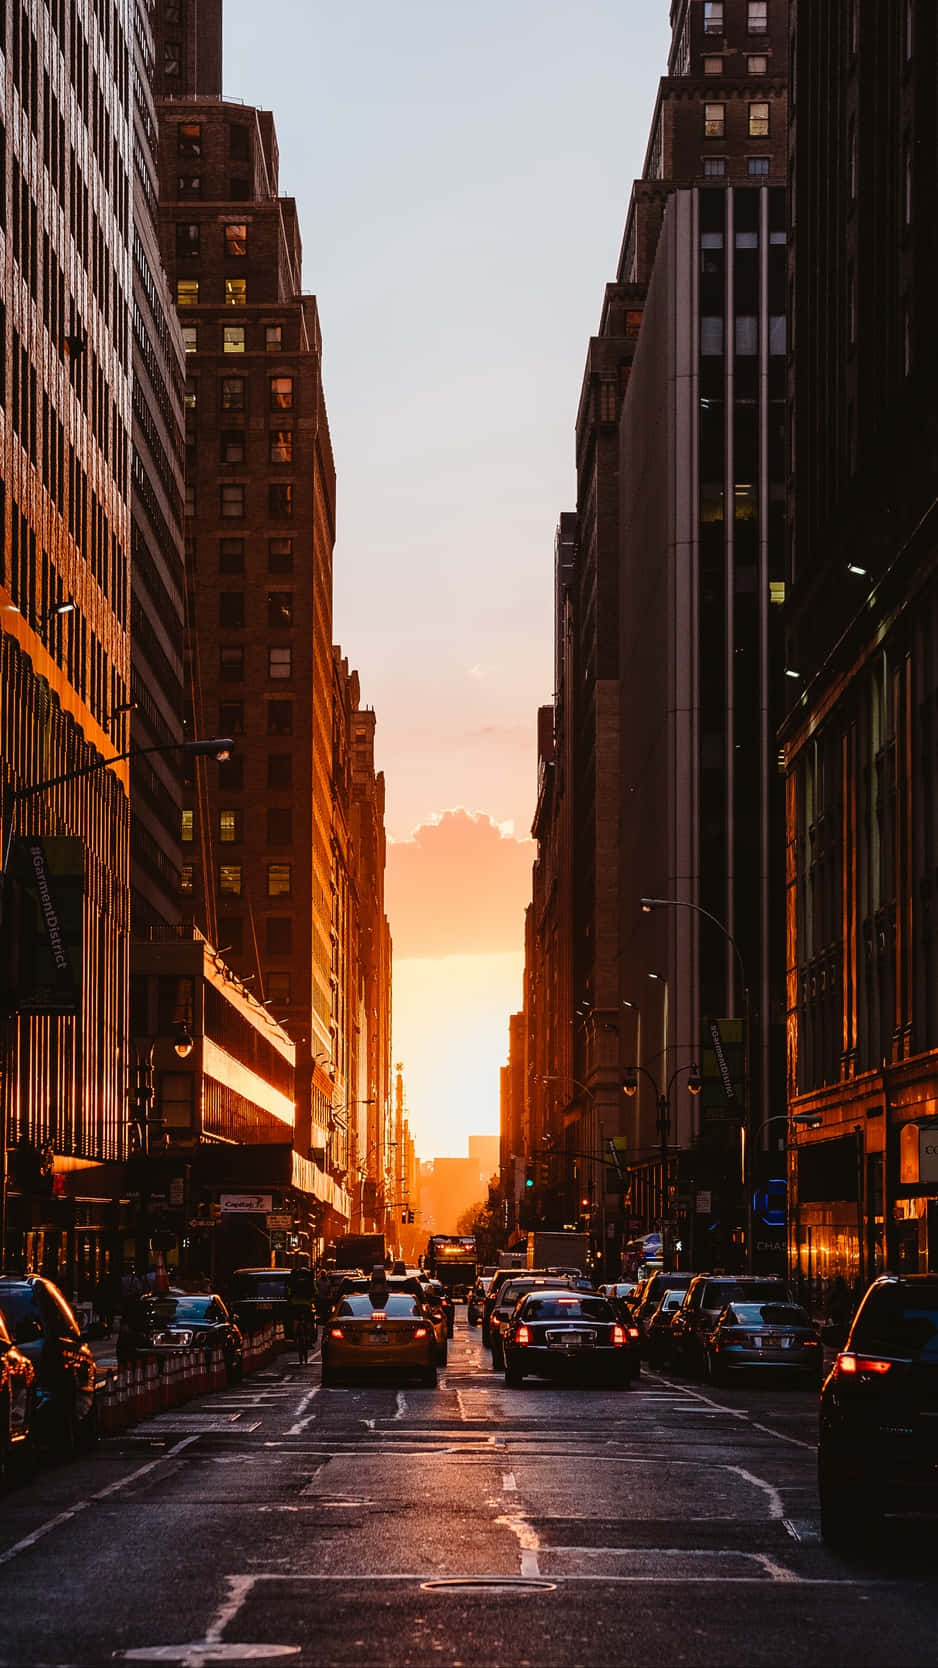 Enjoy a picturesque city sunset through your iPhone Wallpaper